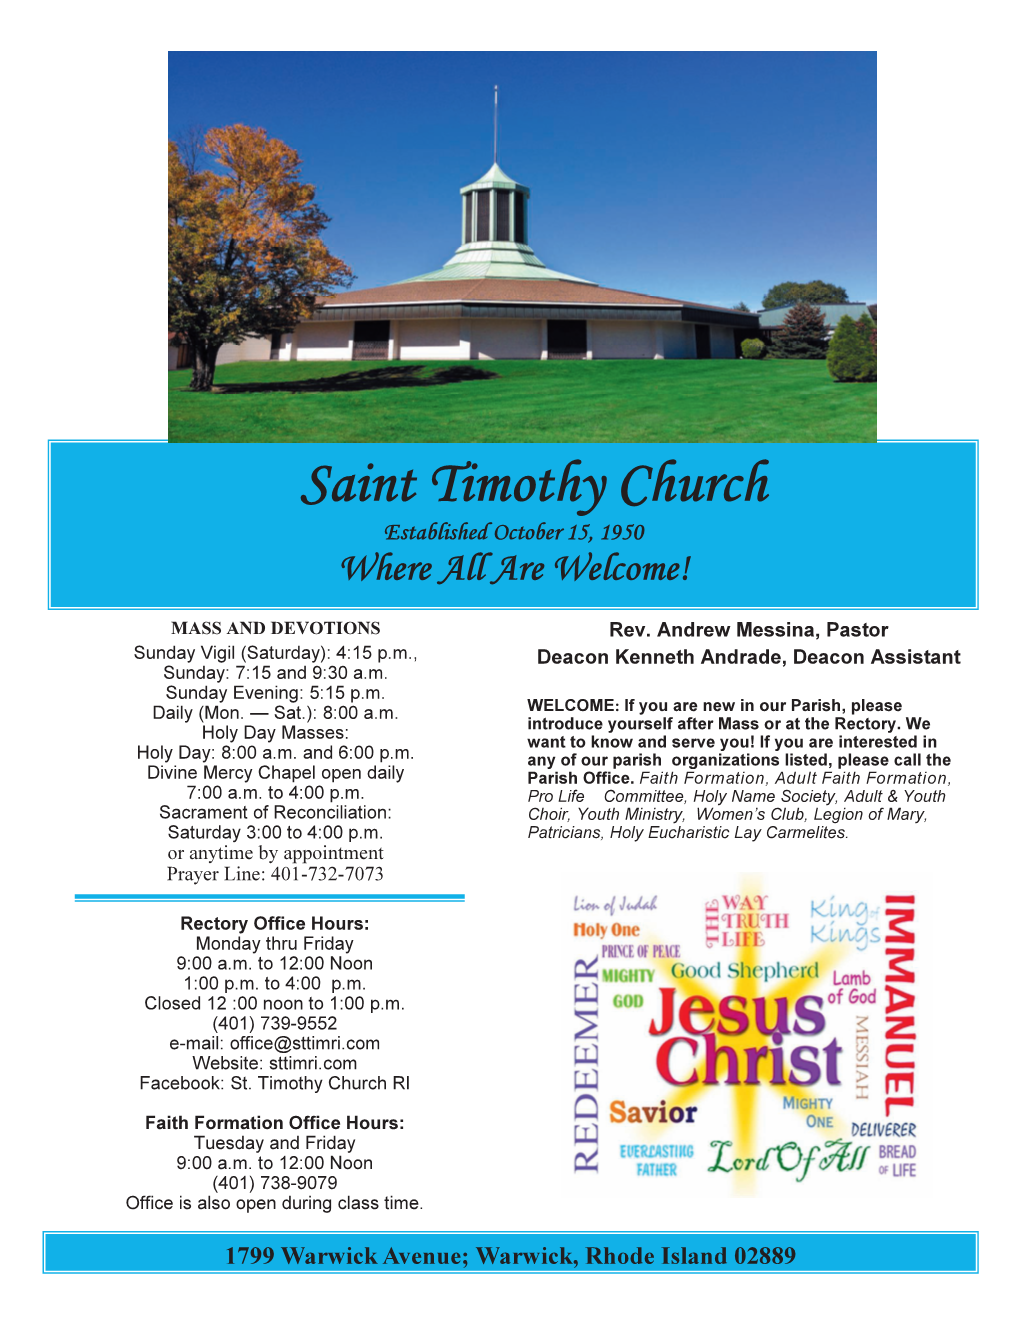 Saint Timothy Church Established October 15, 1950 Where All Are Welcome!